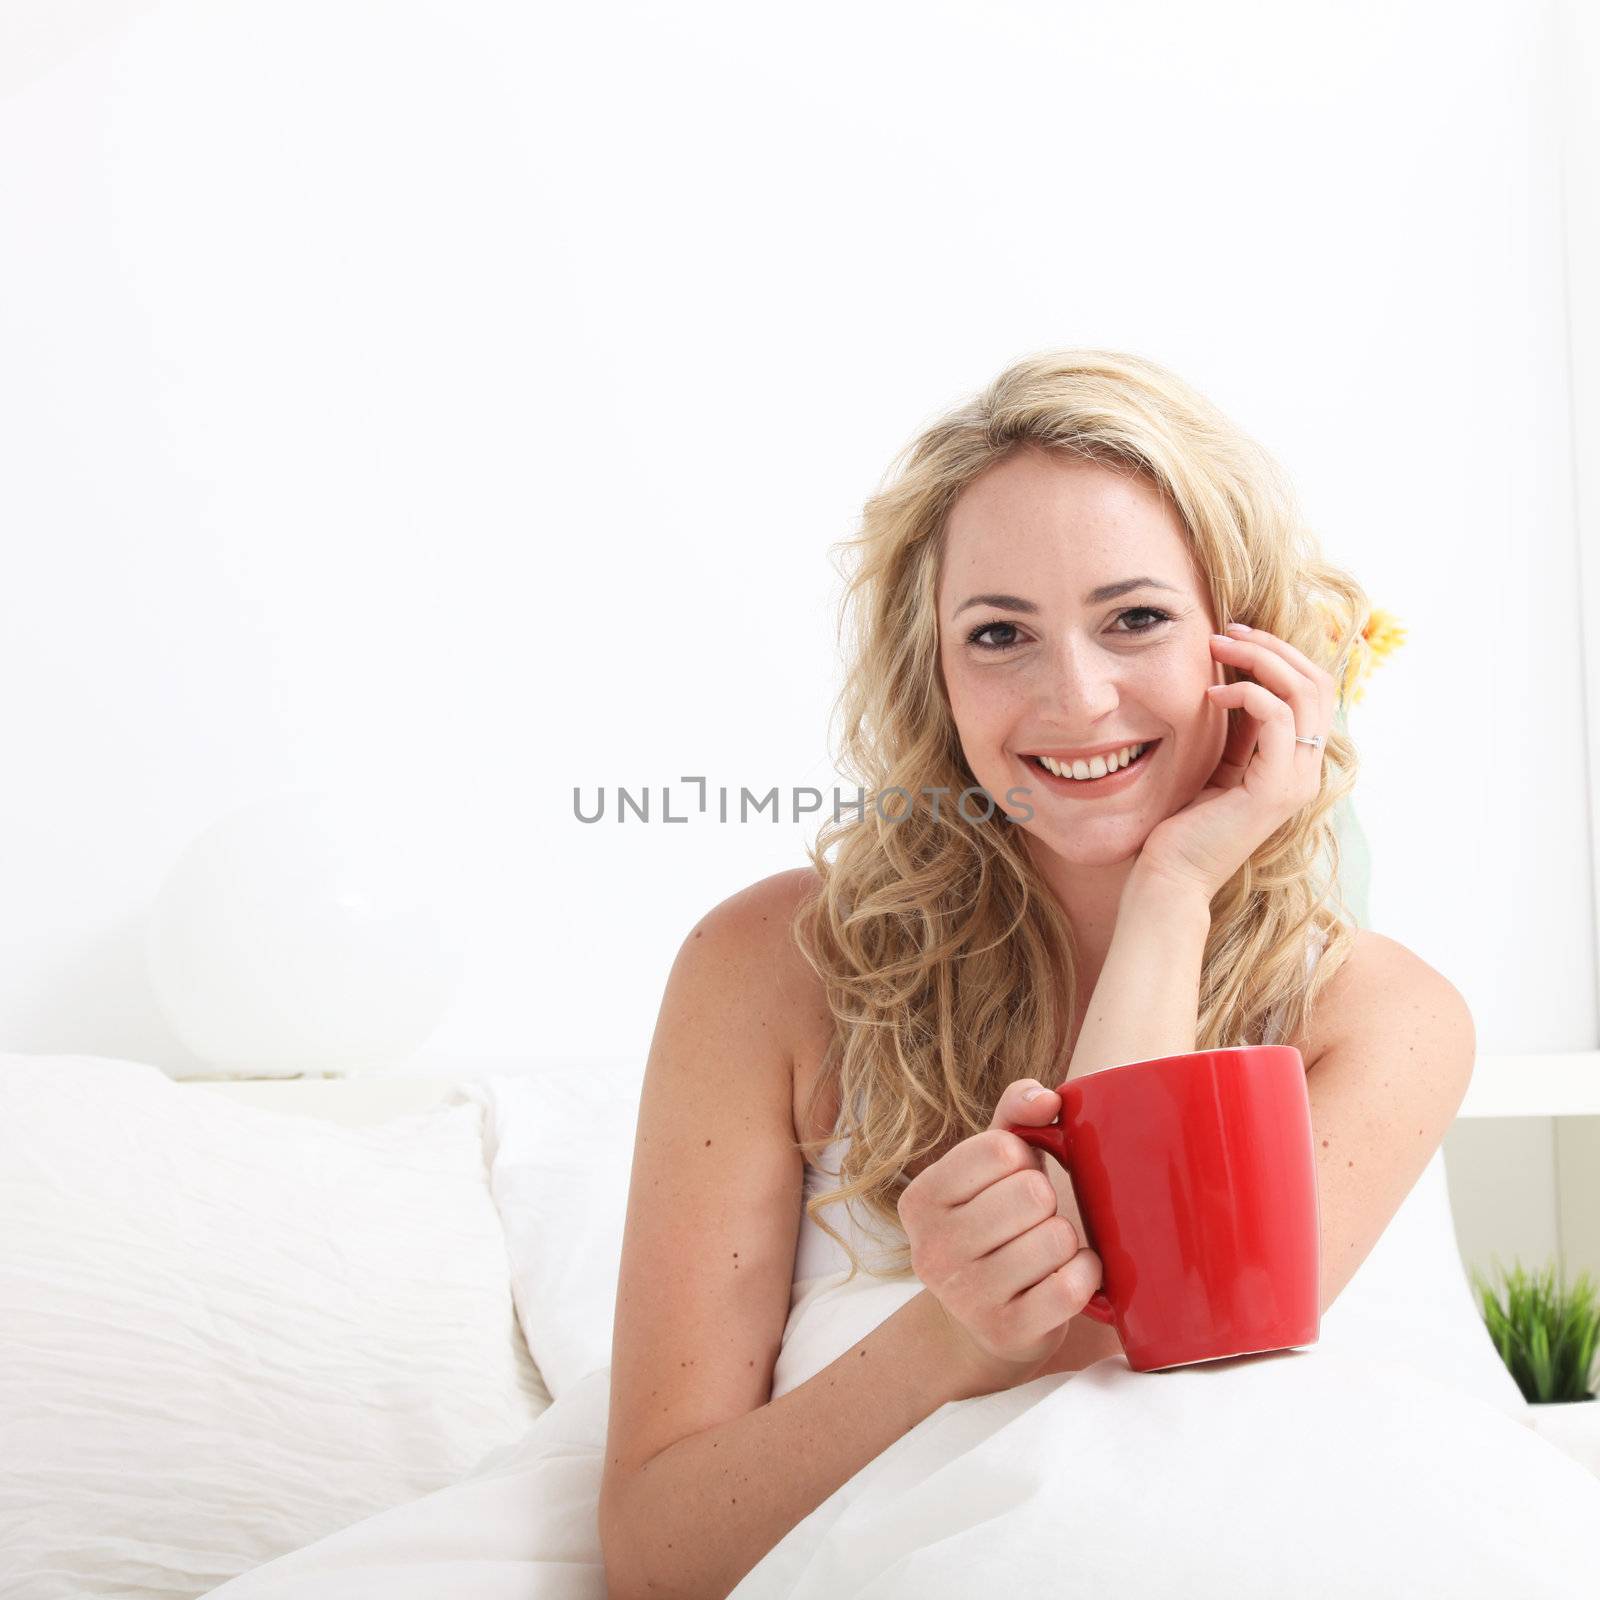 Radiant smiling woman in bed by Farina6000